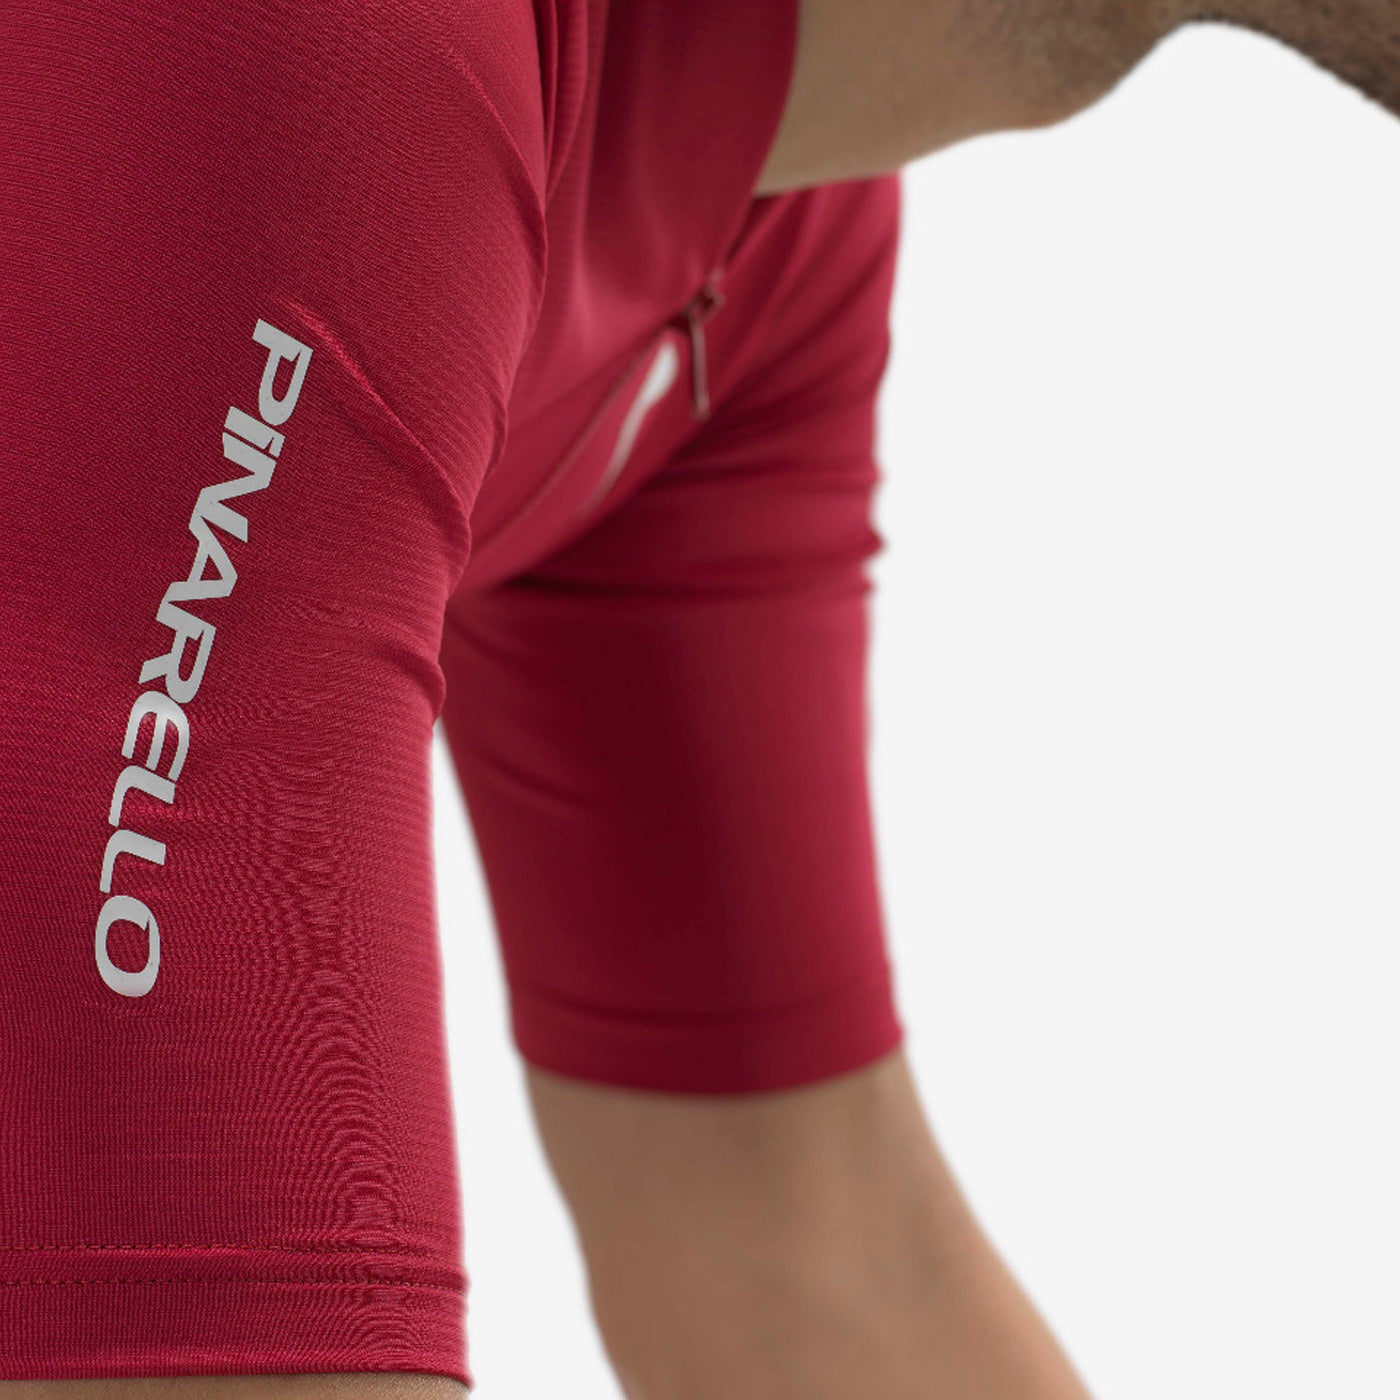 Pinarello F7 jersey - Red | All4cycling